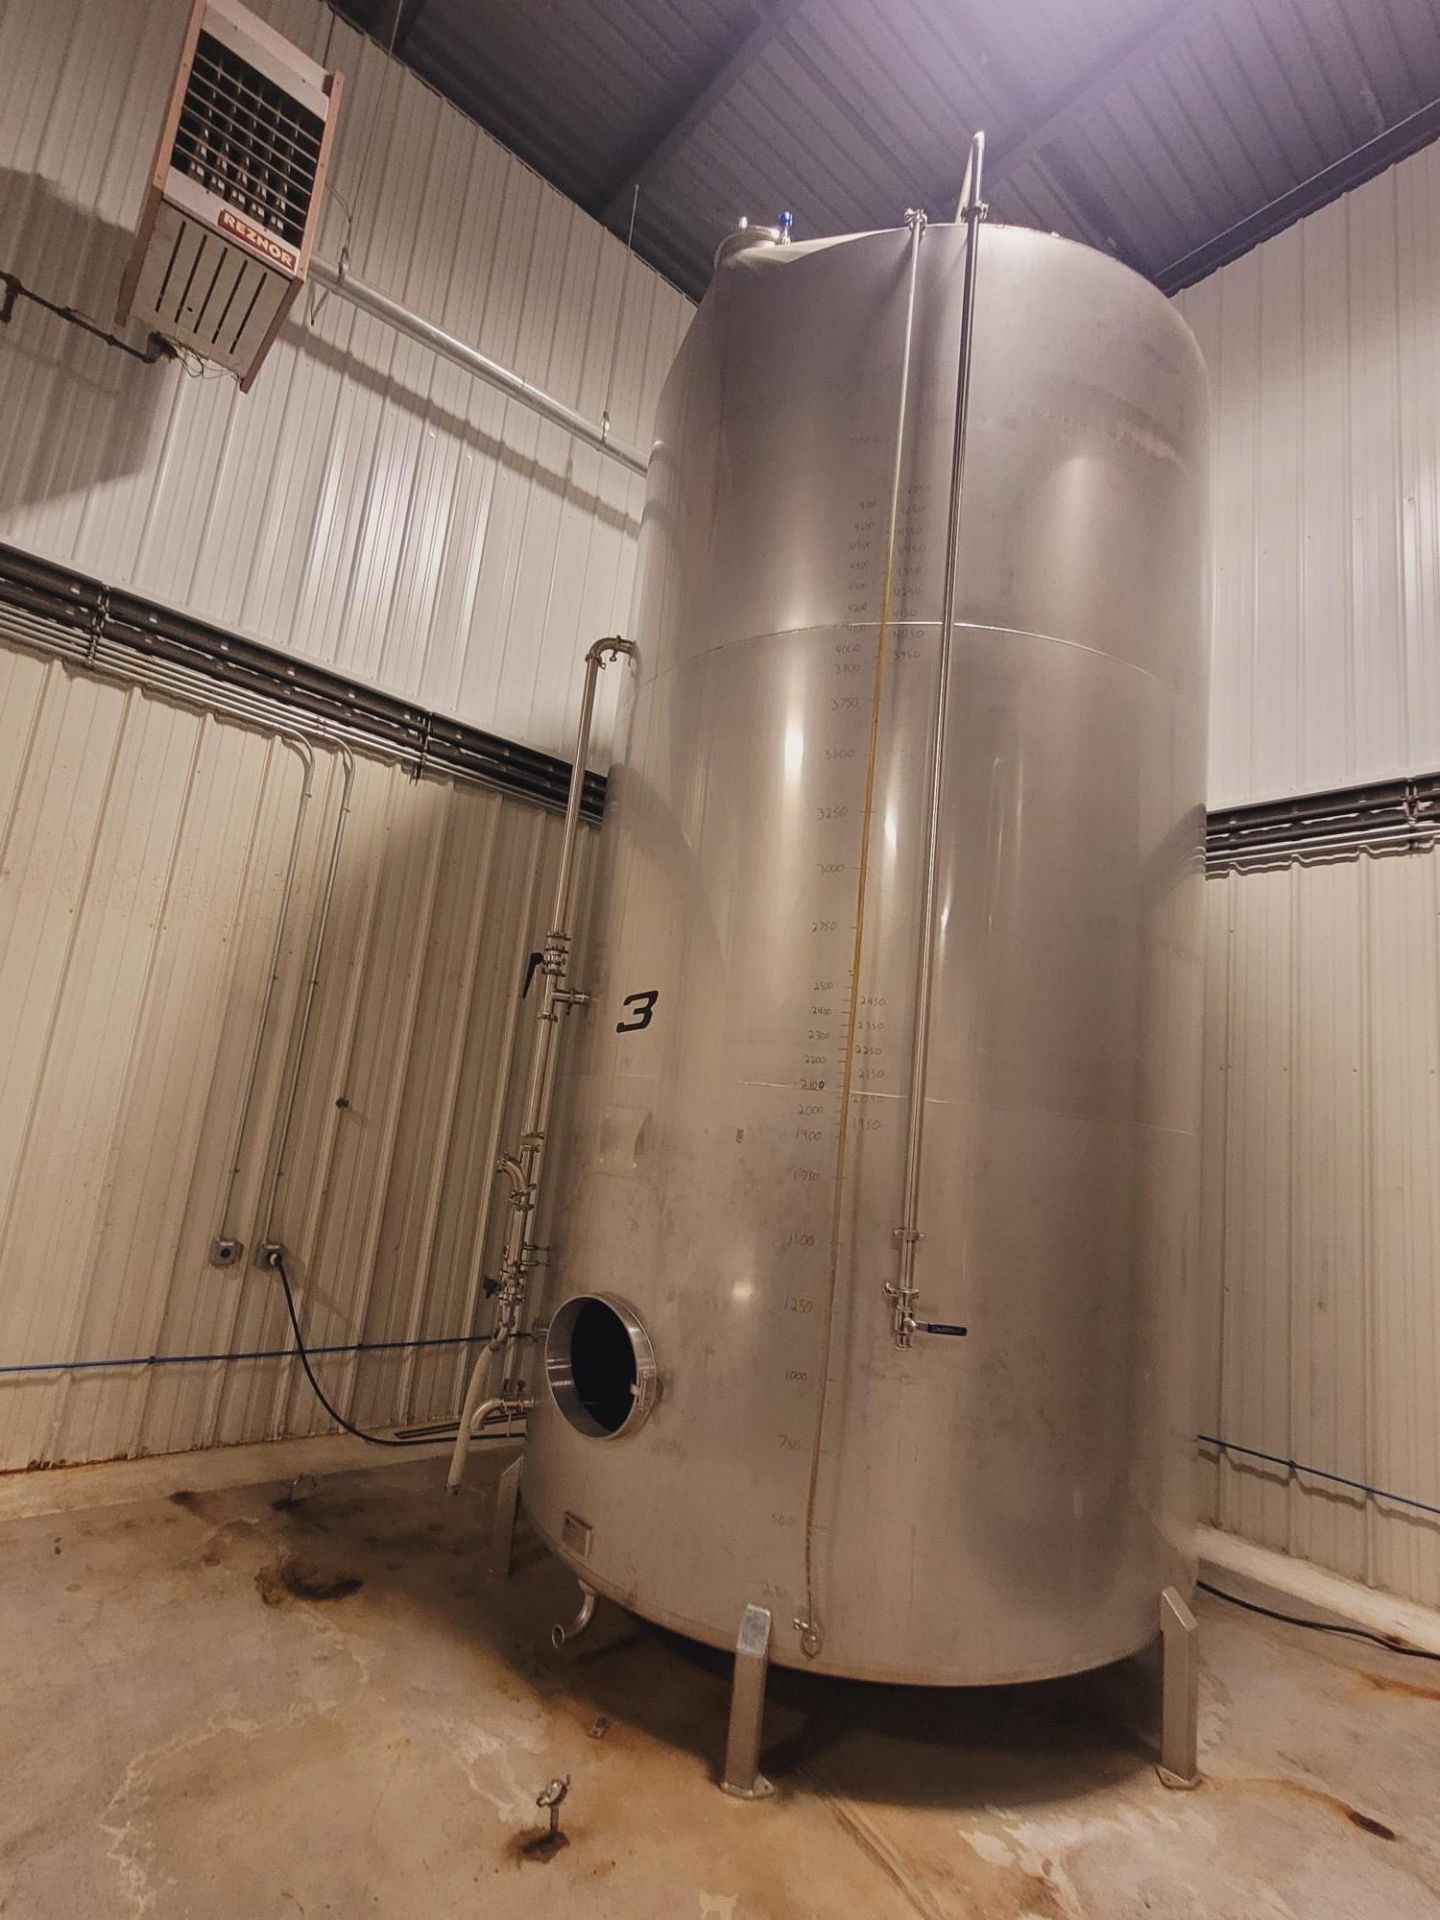 Vance metals 6100 gallon capacity vertical type 304 stainless steel single wall storage tank. - Image 2 of 4